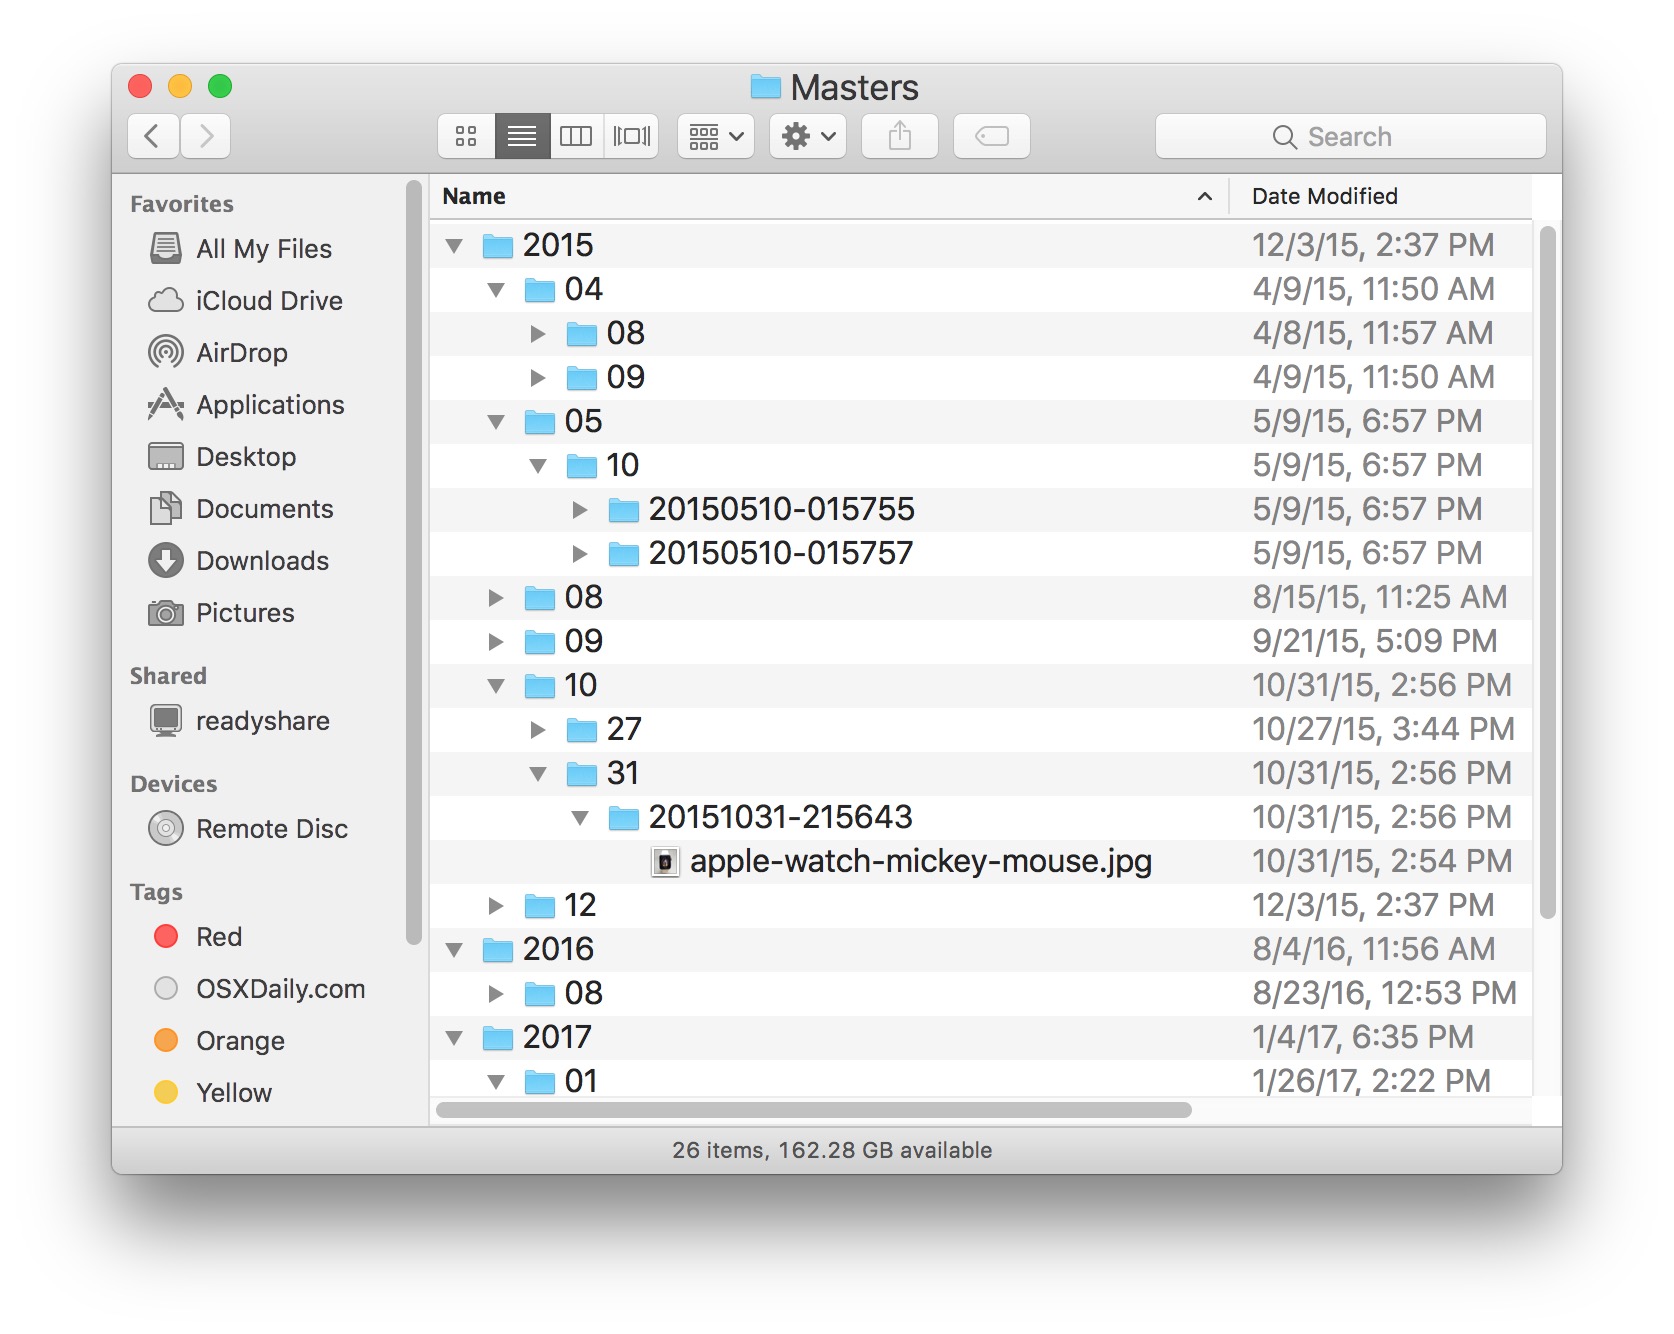 get the image file for mac os x file